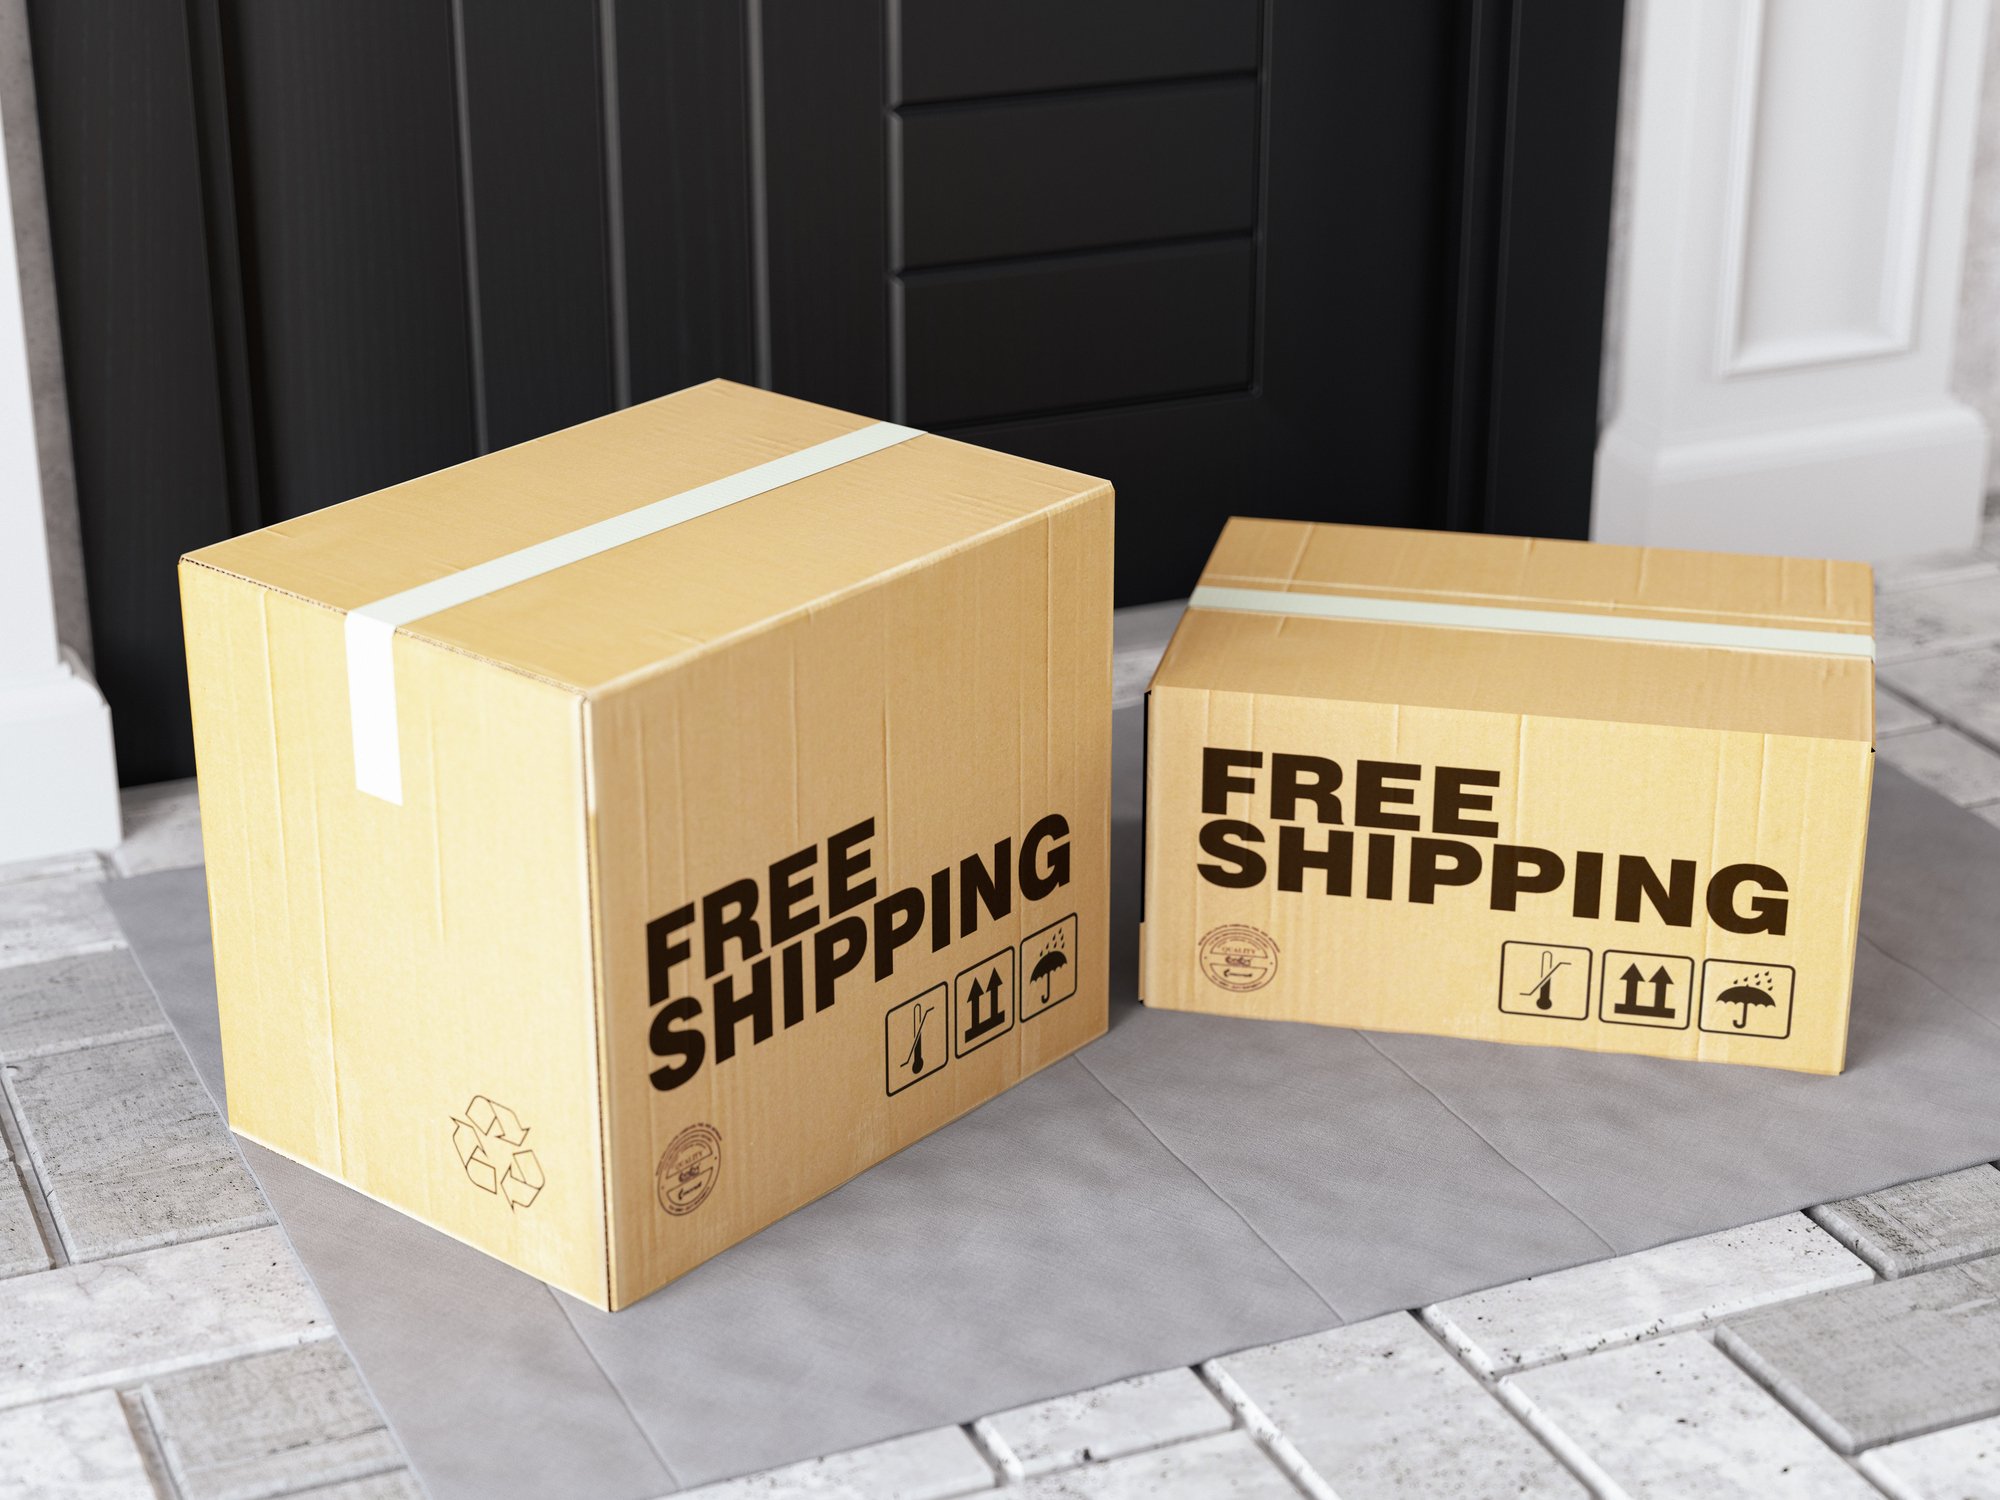 free shipping printed on a parcel